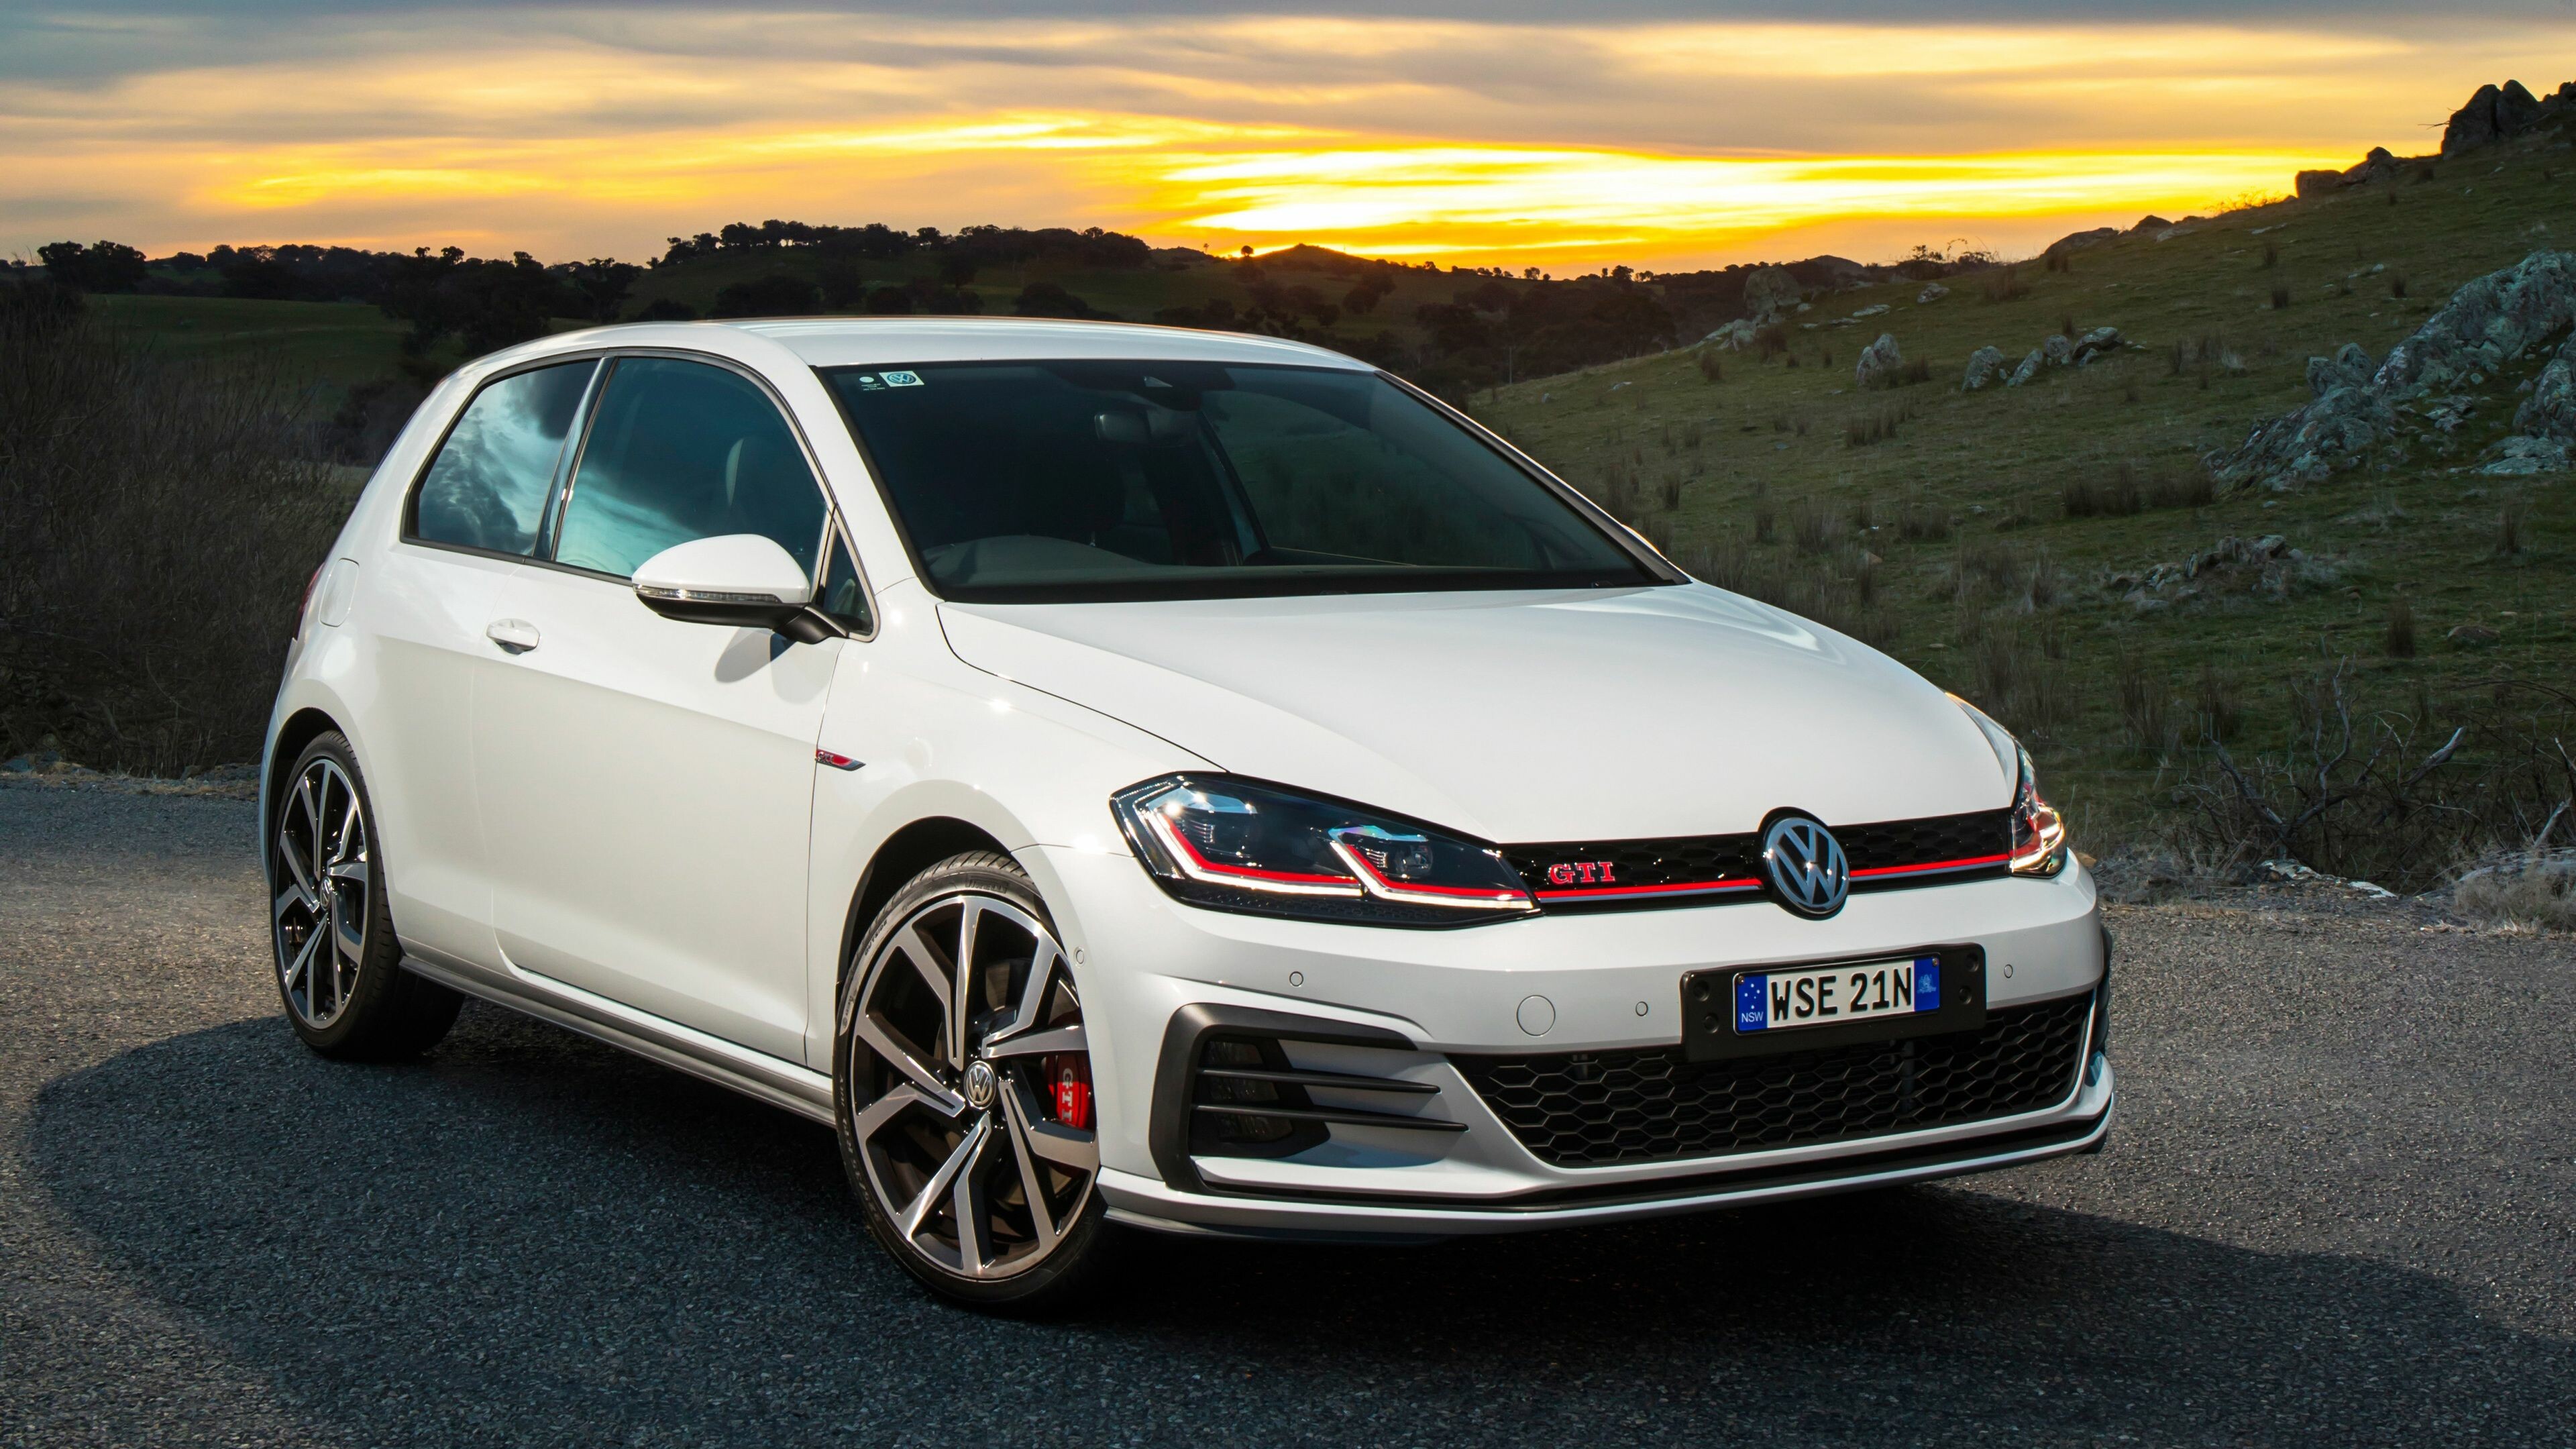 Volkswagen: A German company that produces cars, GTI Performance Edition 2017. 3840x2160 4K Background.